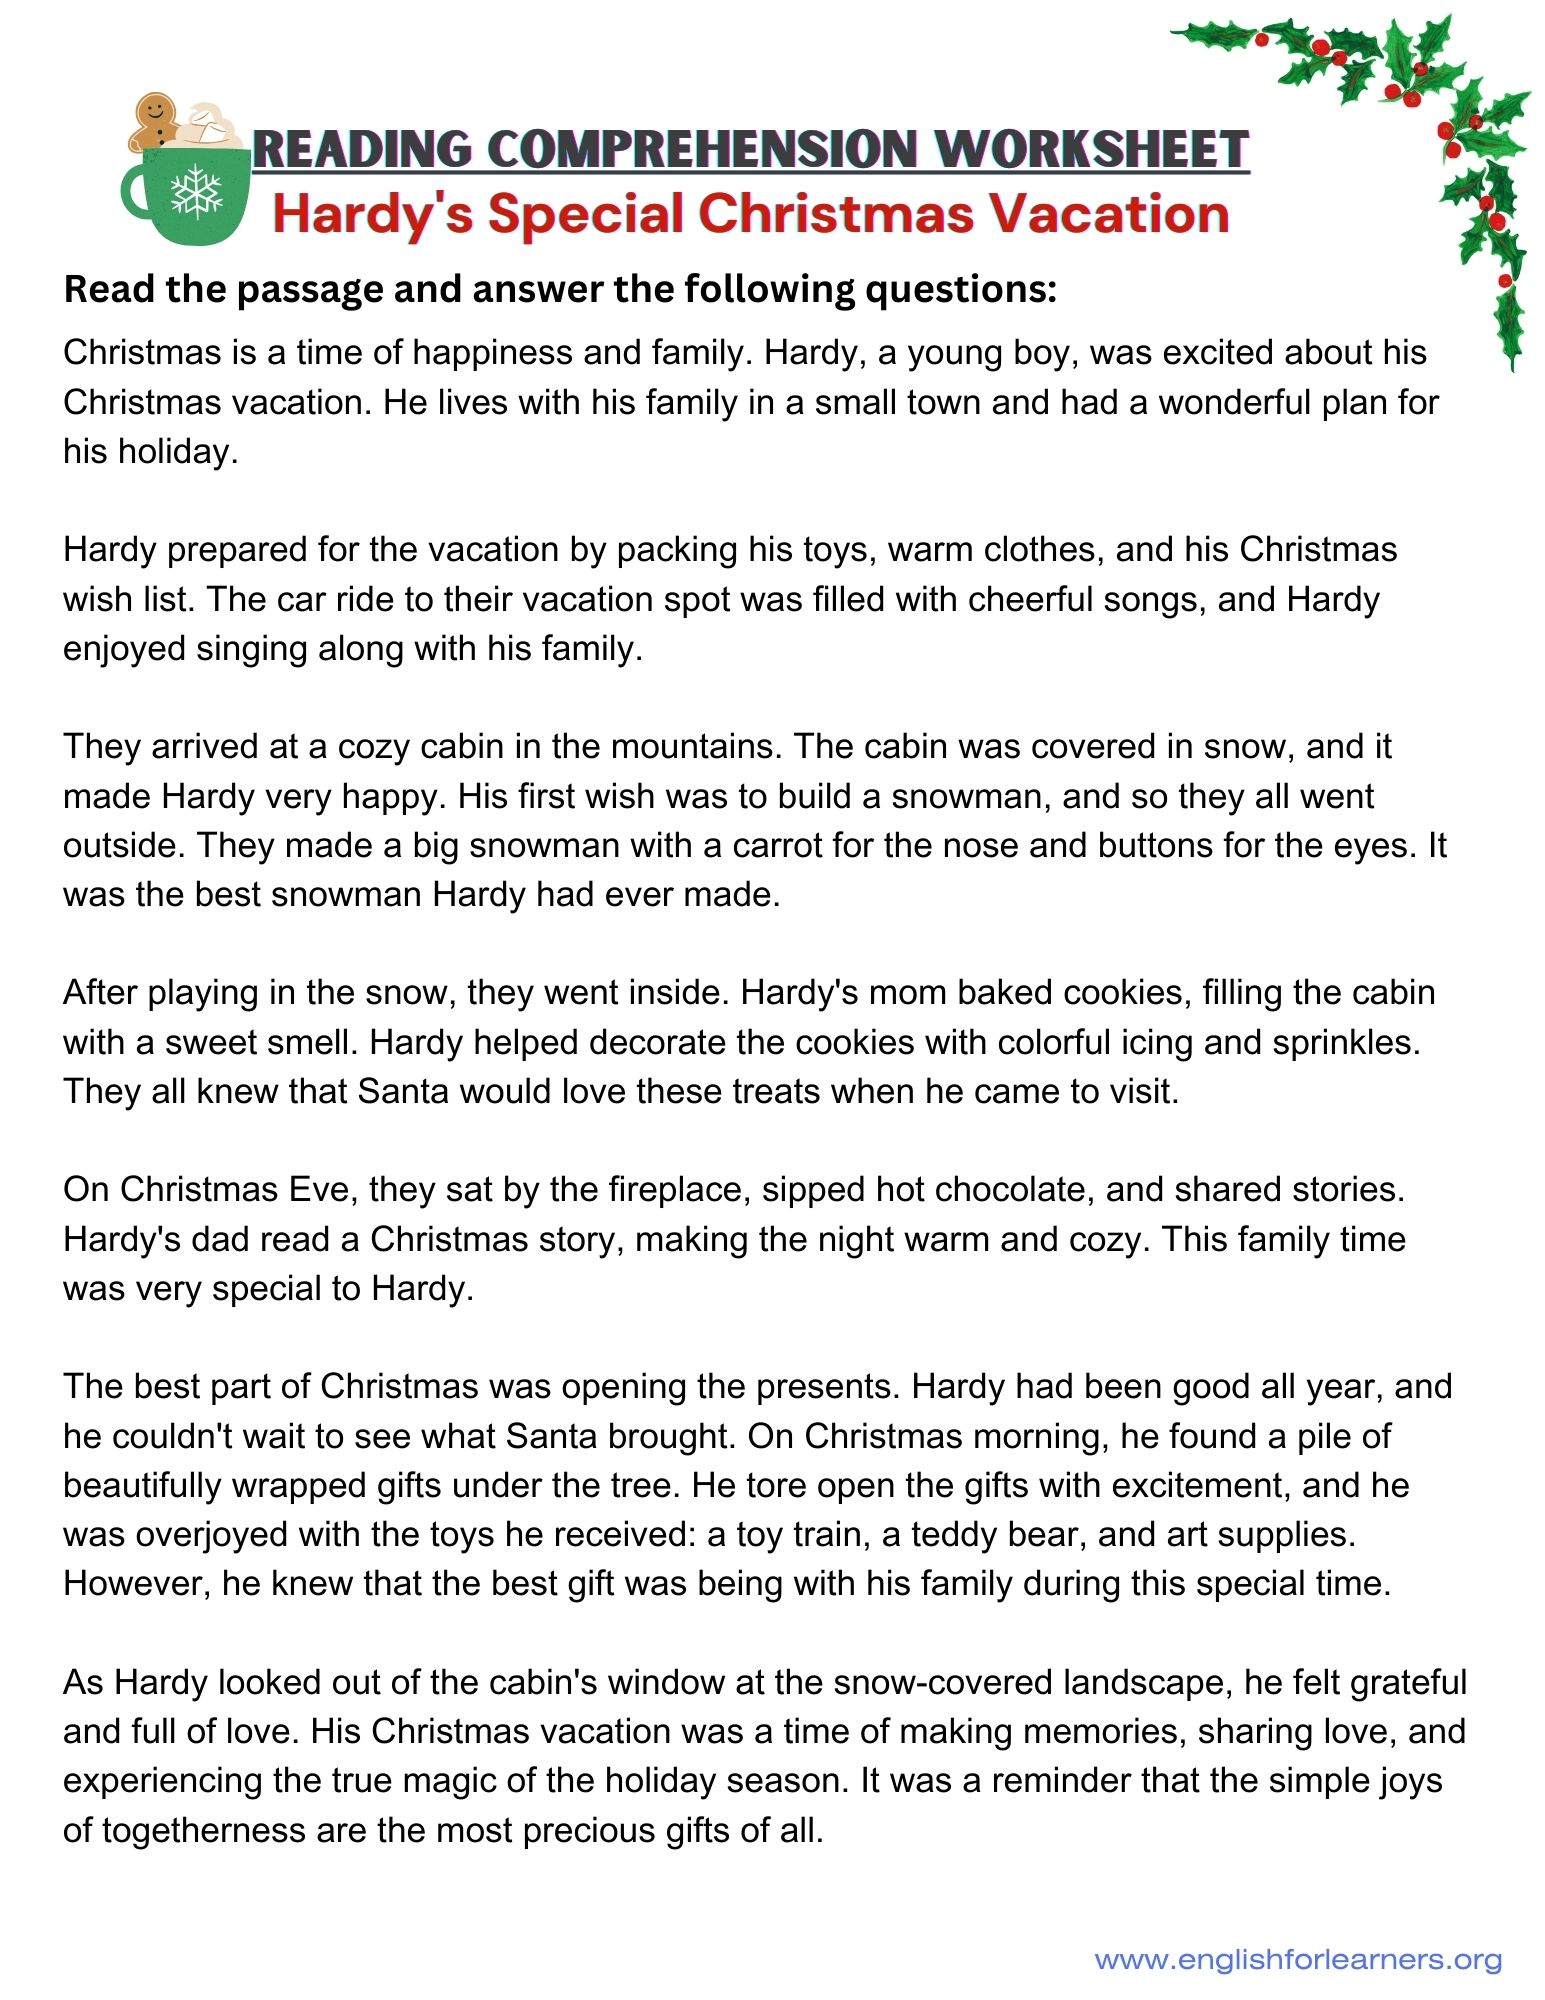 Christmas reading comprehension, reading passage christmas, reading worksheet on christmas, 